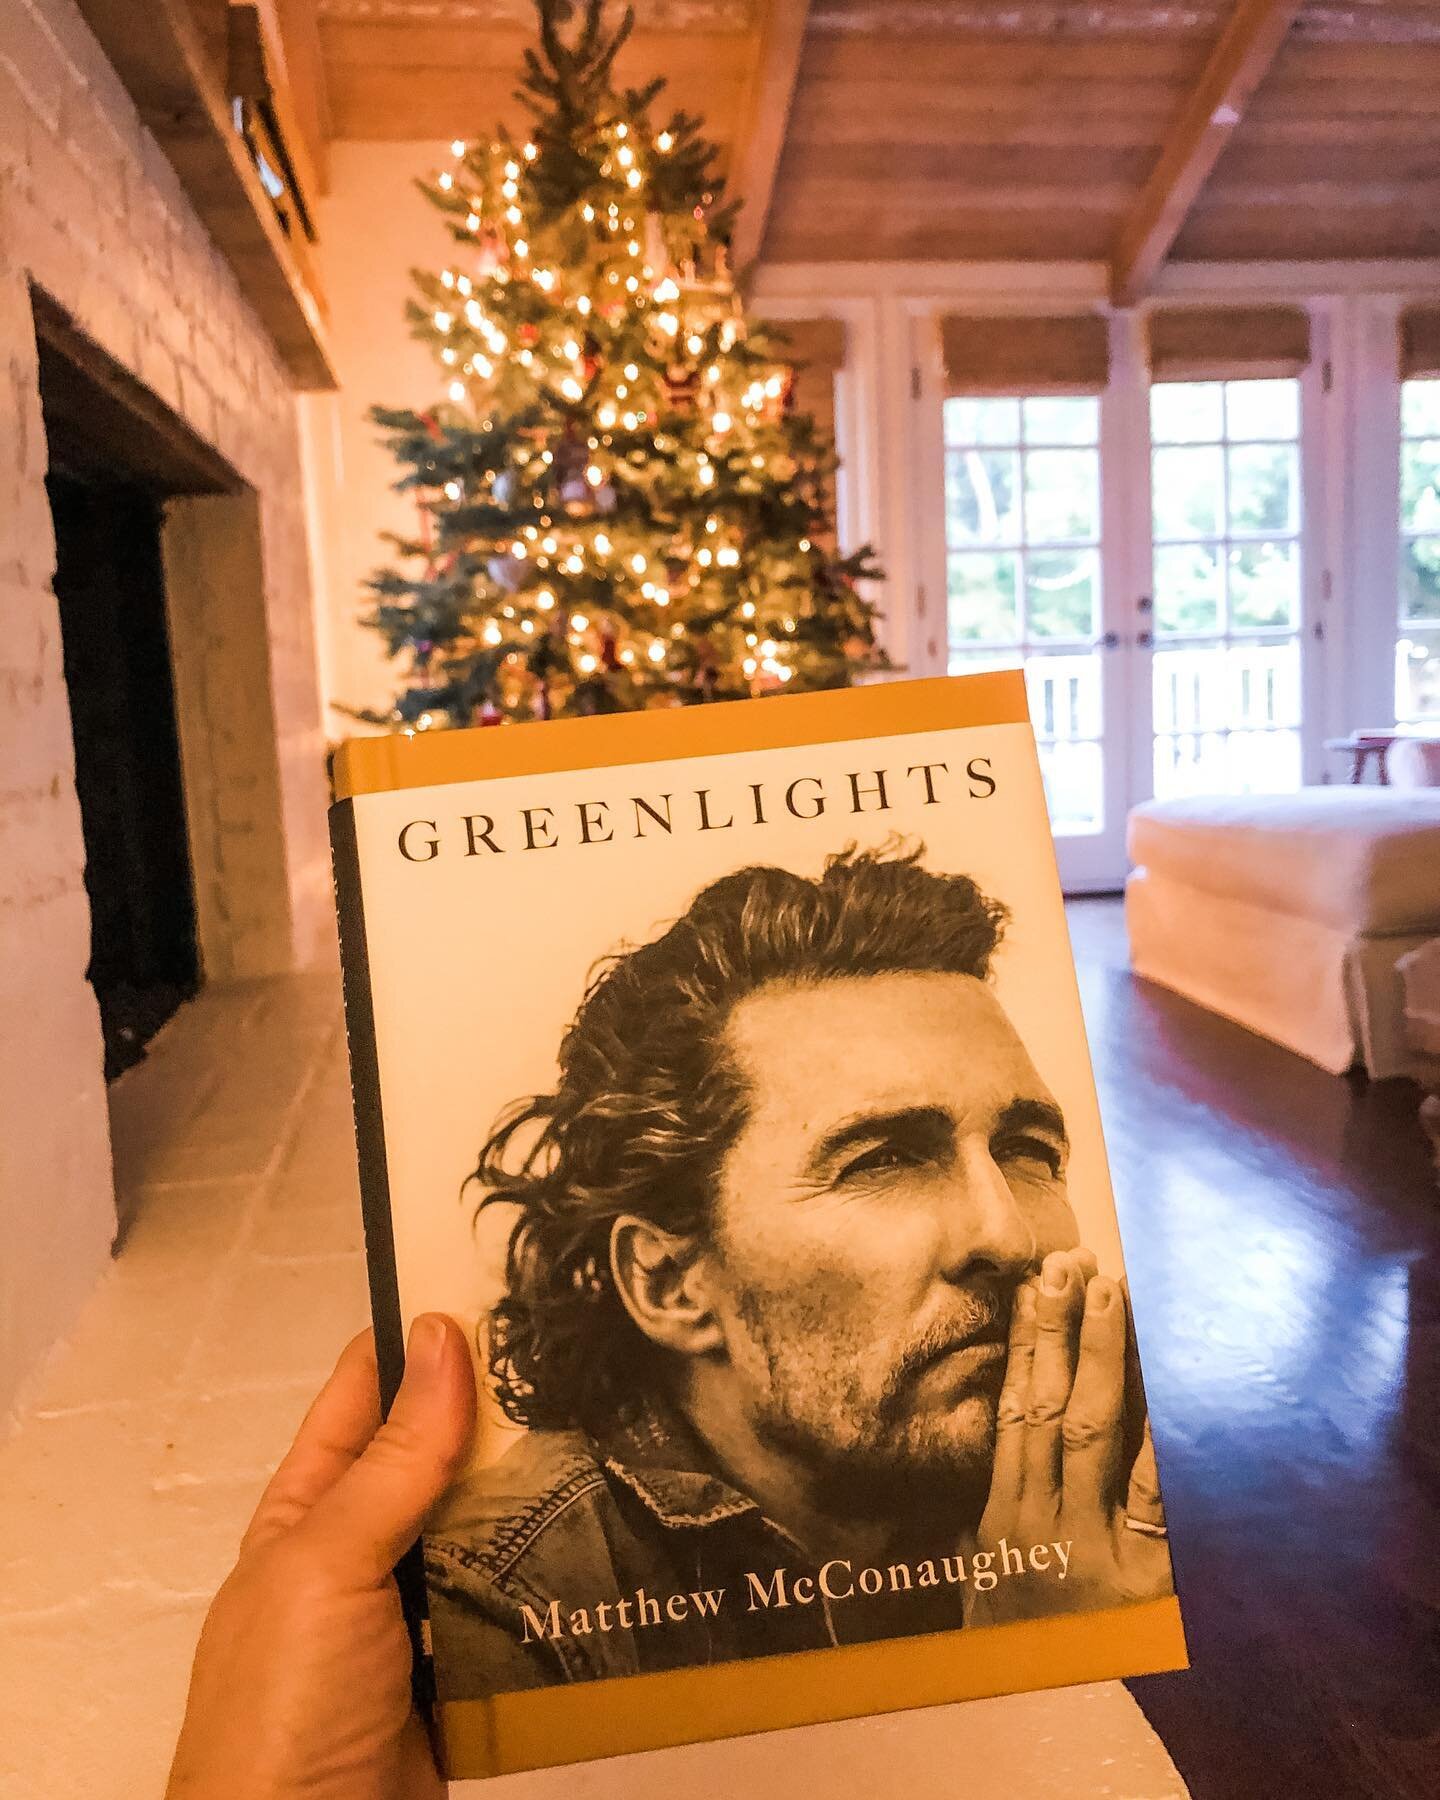 For Christmas, I gifted my husband Greenlights by Matthew McConaughey. He read it in three days. He loved it. This was one of my favorite book gifts for him as he is a movie buff, an avid reader and a longtime Matthew McConaughey fan. He shared with 